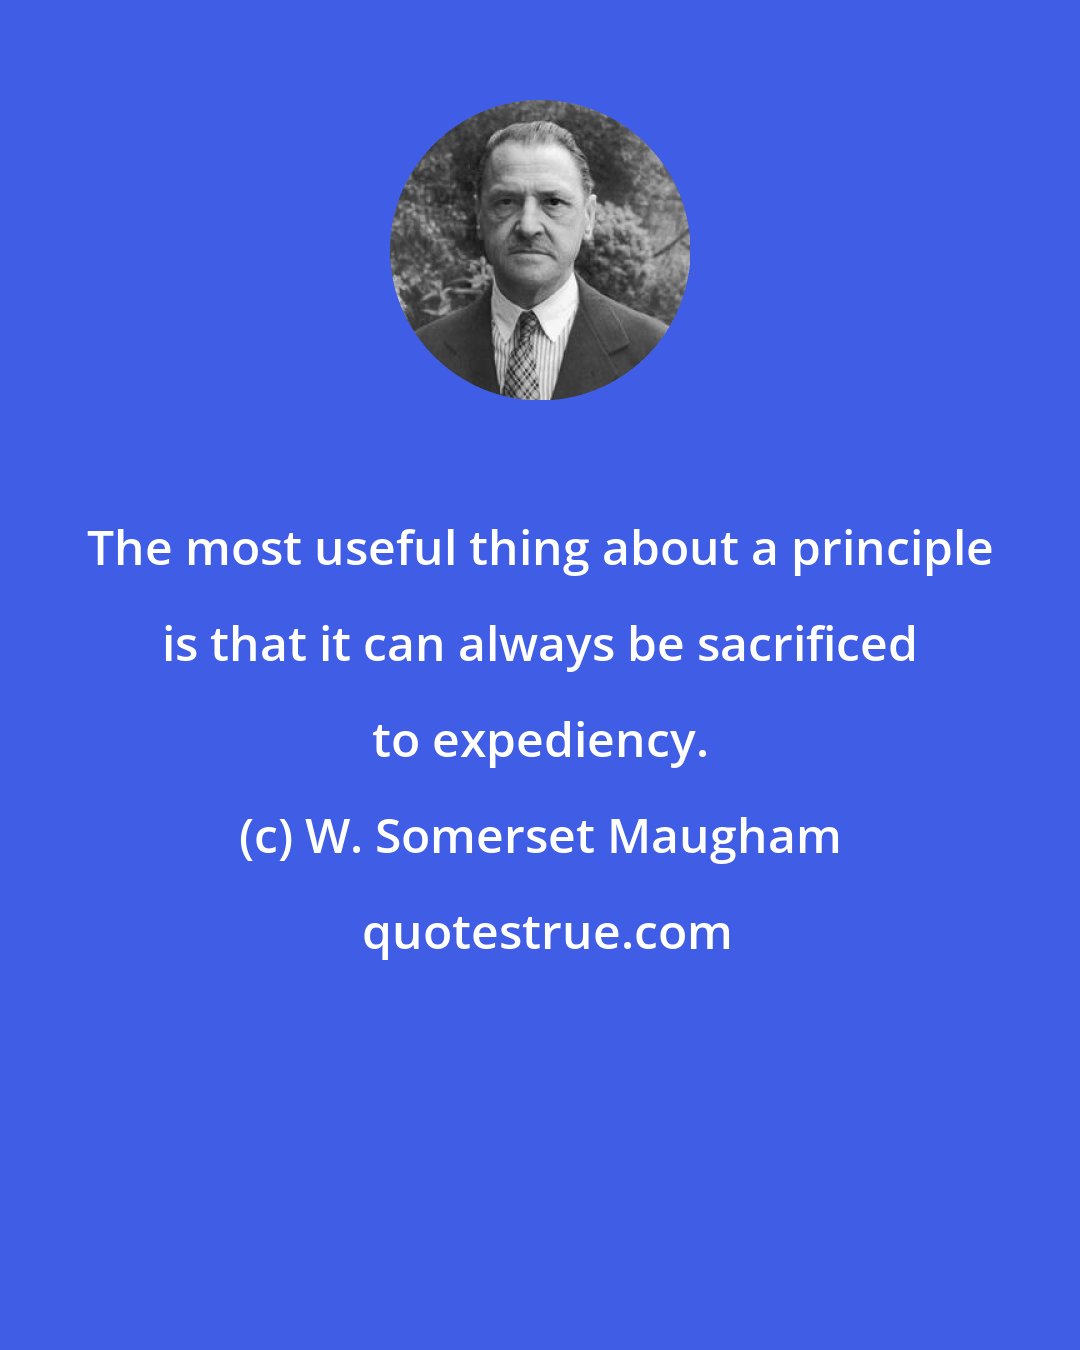 W. Somerset Maugham: The most useful thing about a principle is that it can always be sacrificed to expediency.